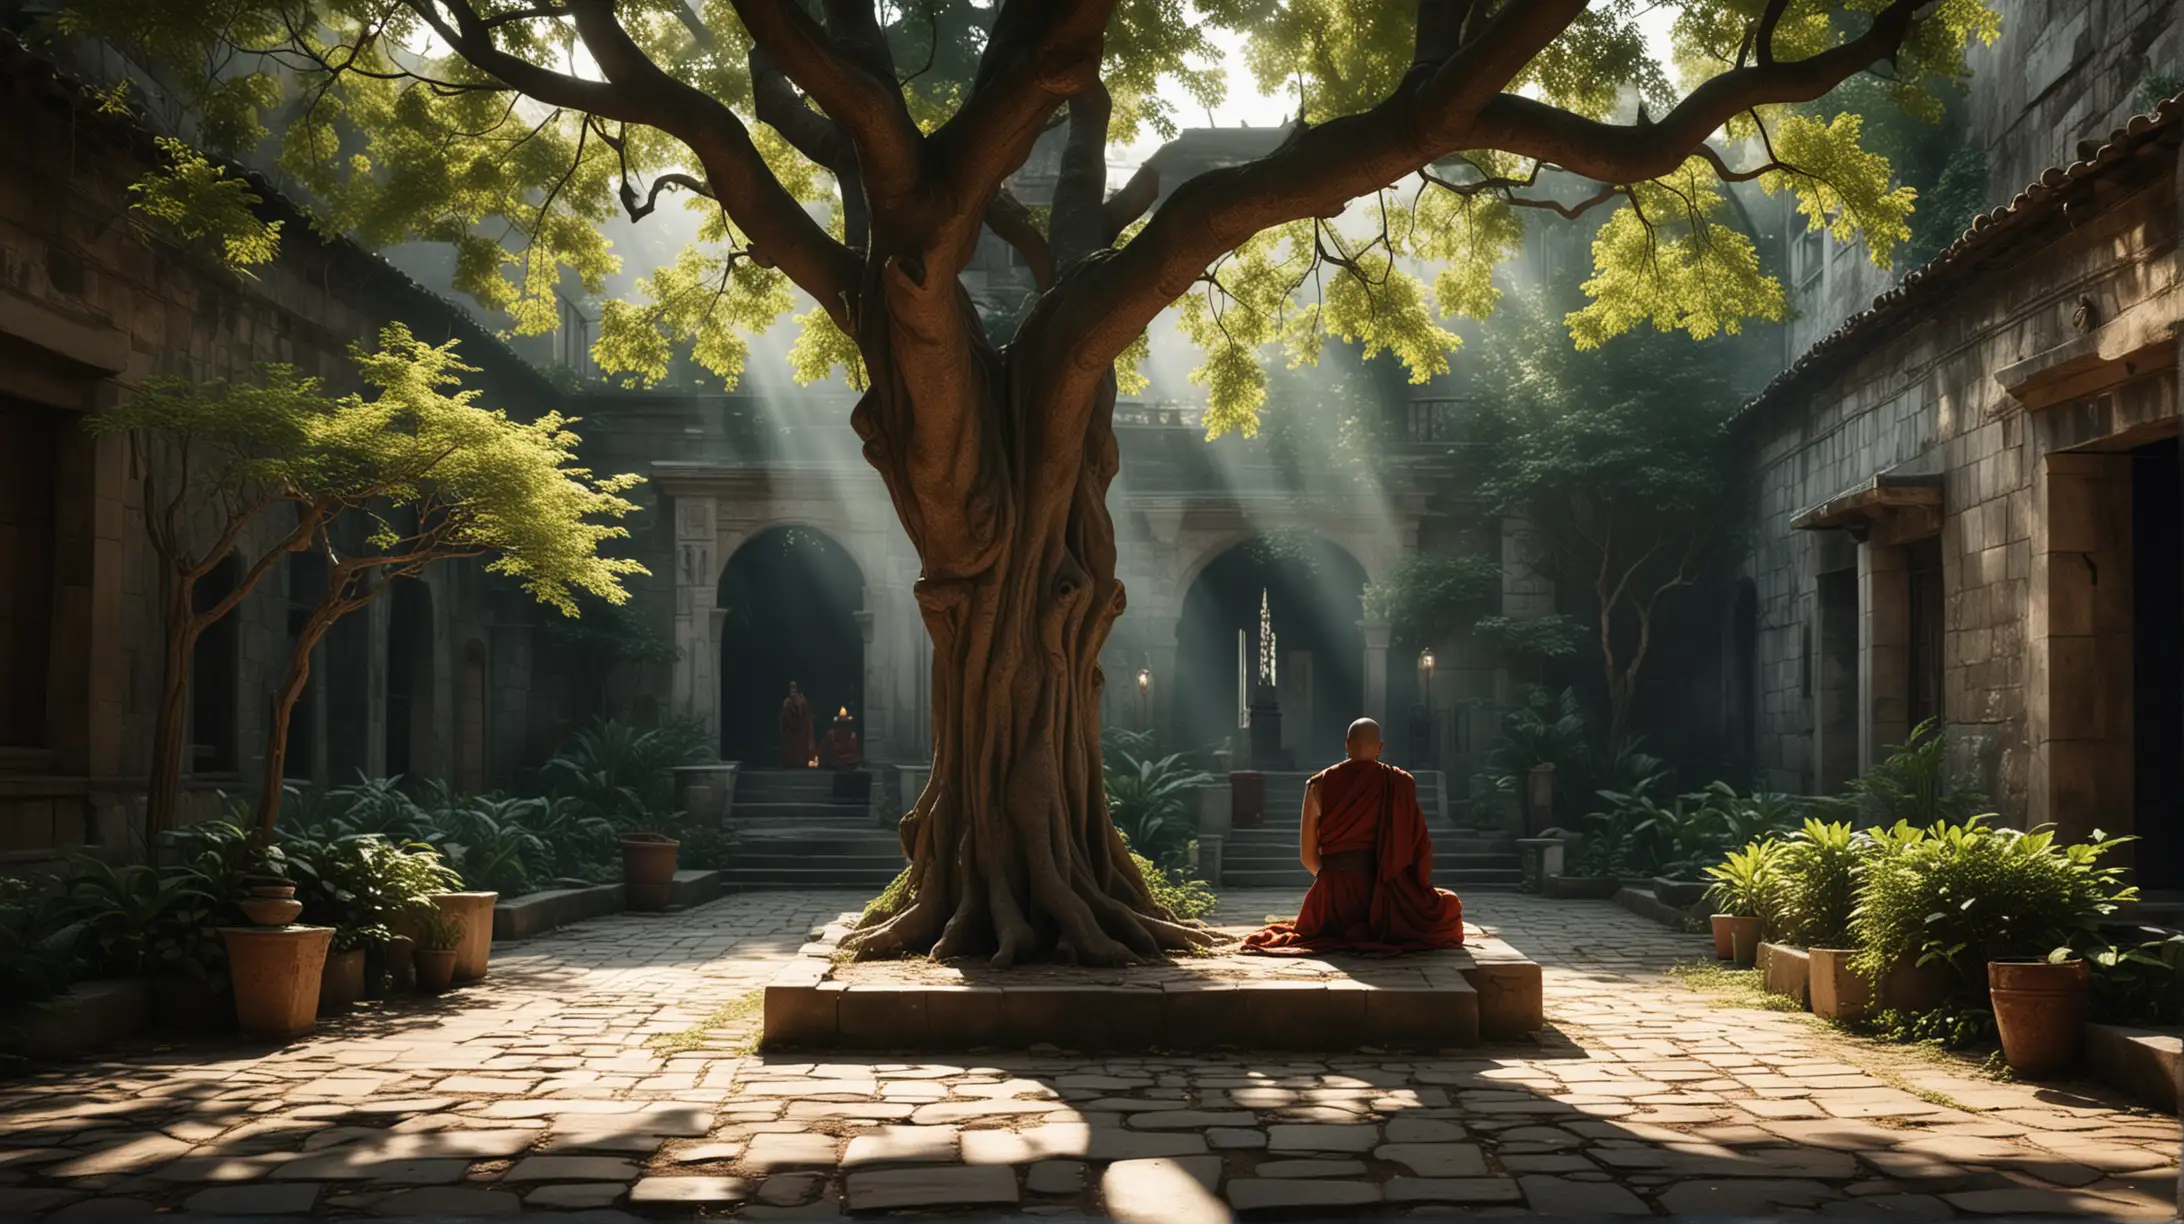 Serene Monastery Courtyard Conversation Wise Monk and Devoted Follower Discuss Compassion